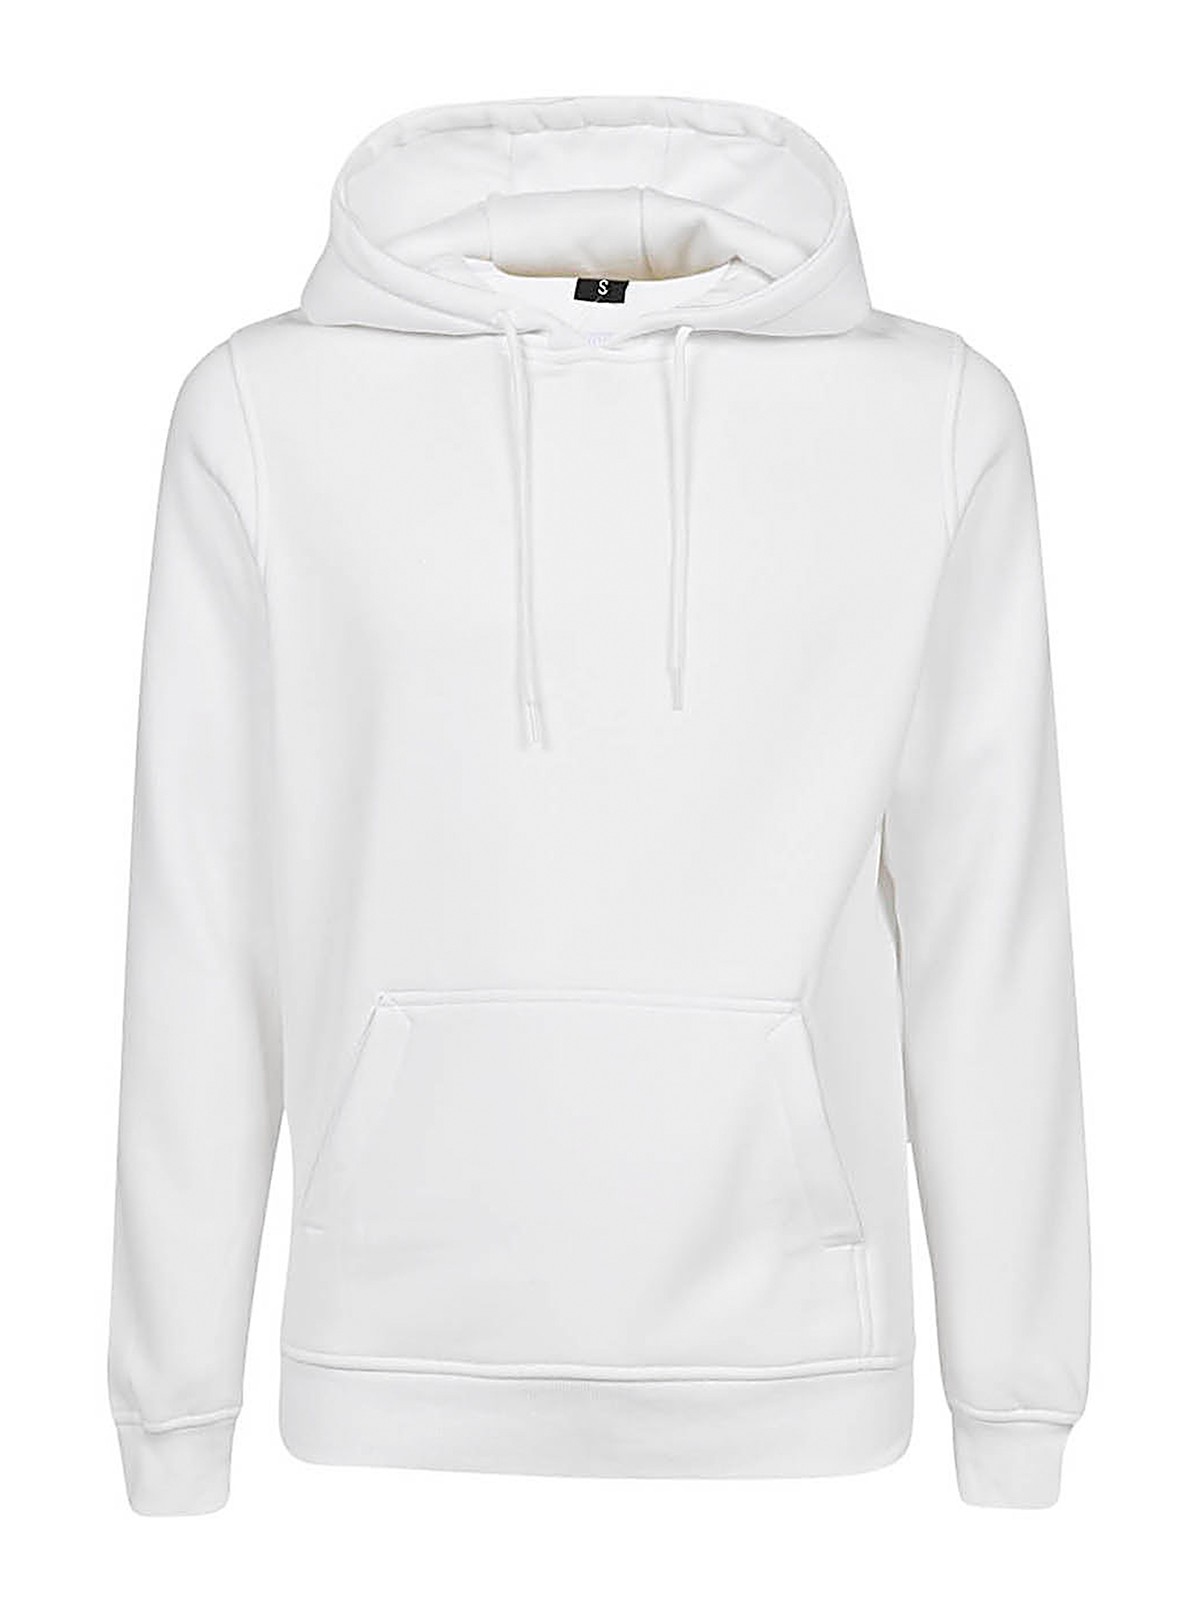 Encré. Horoscope Cotton Hoodie In White